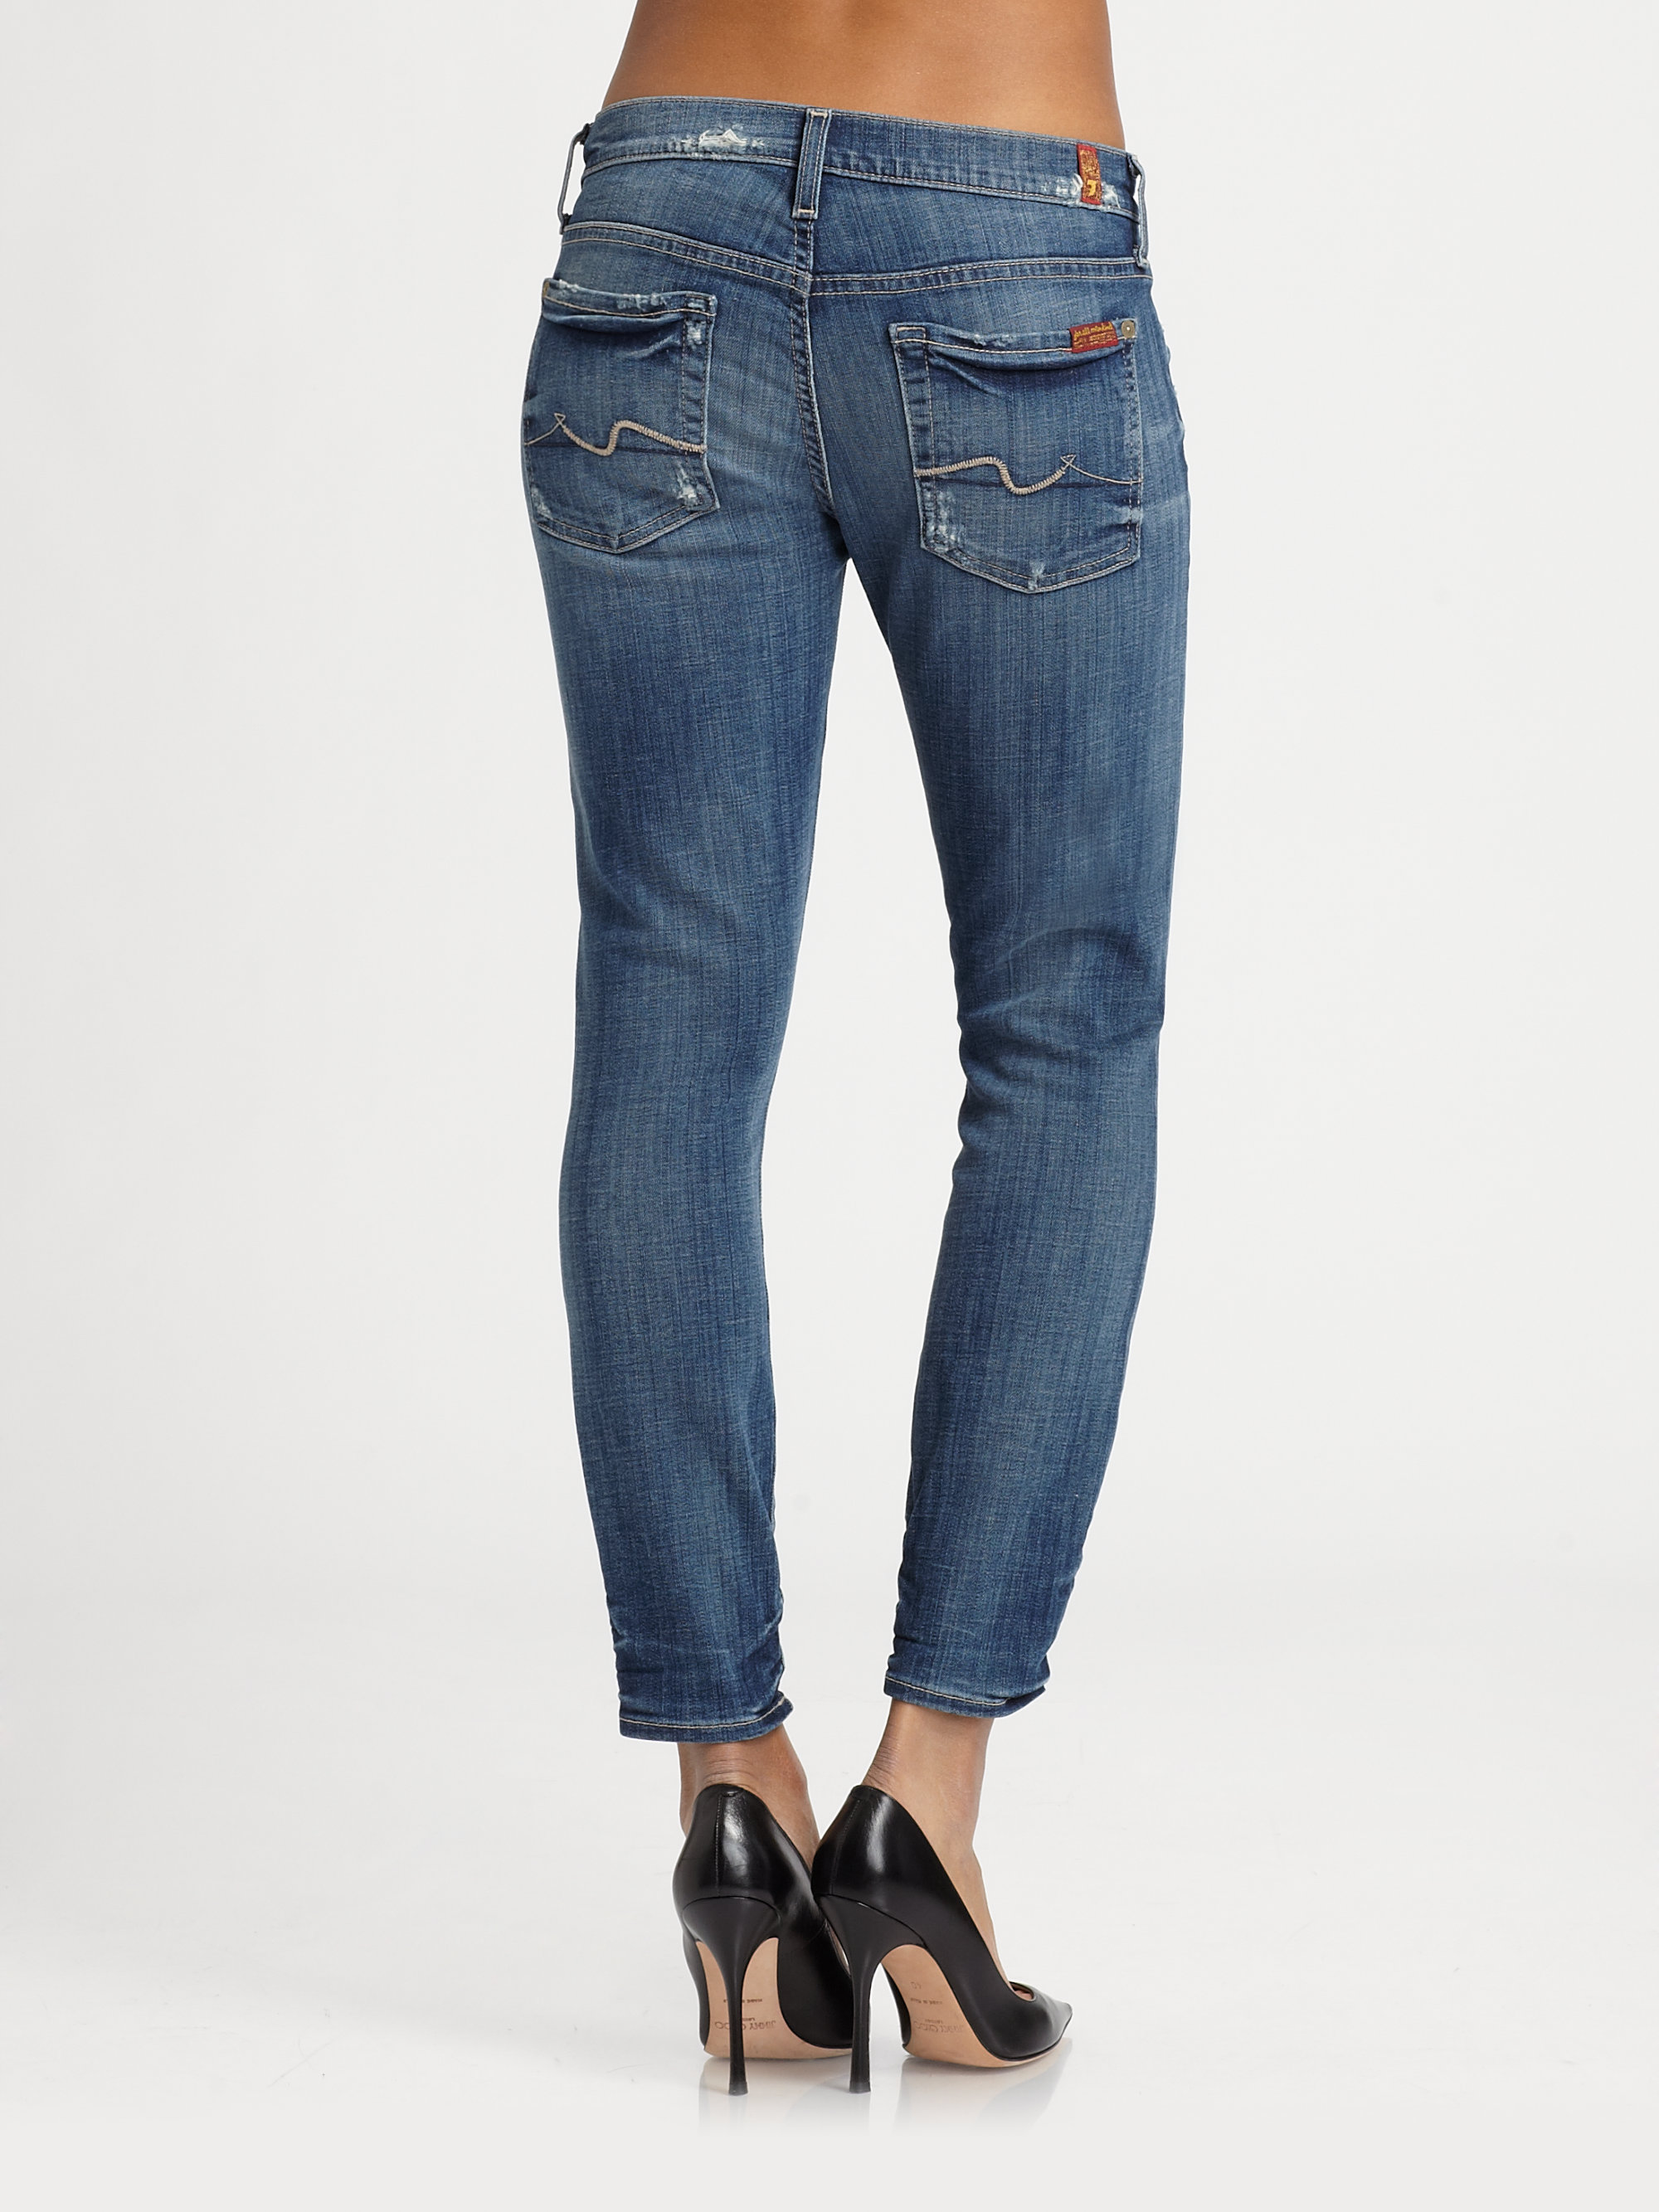 7 For All Mankind Gwenevere Crop Jeans in Blue - Lyst